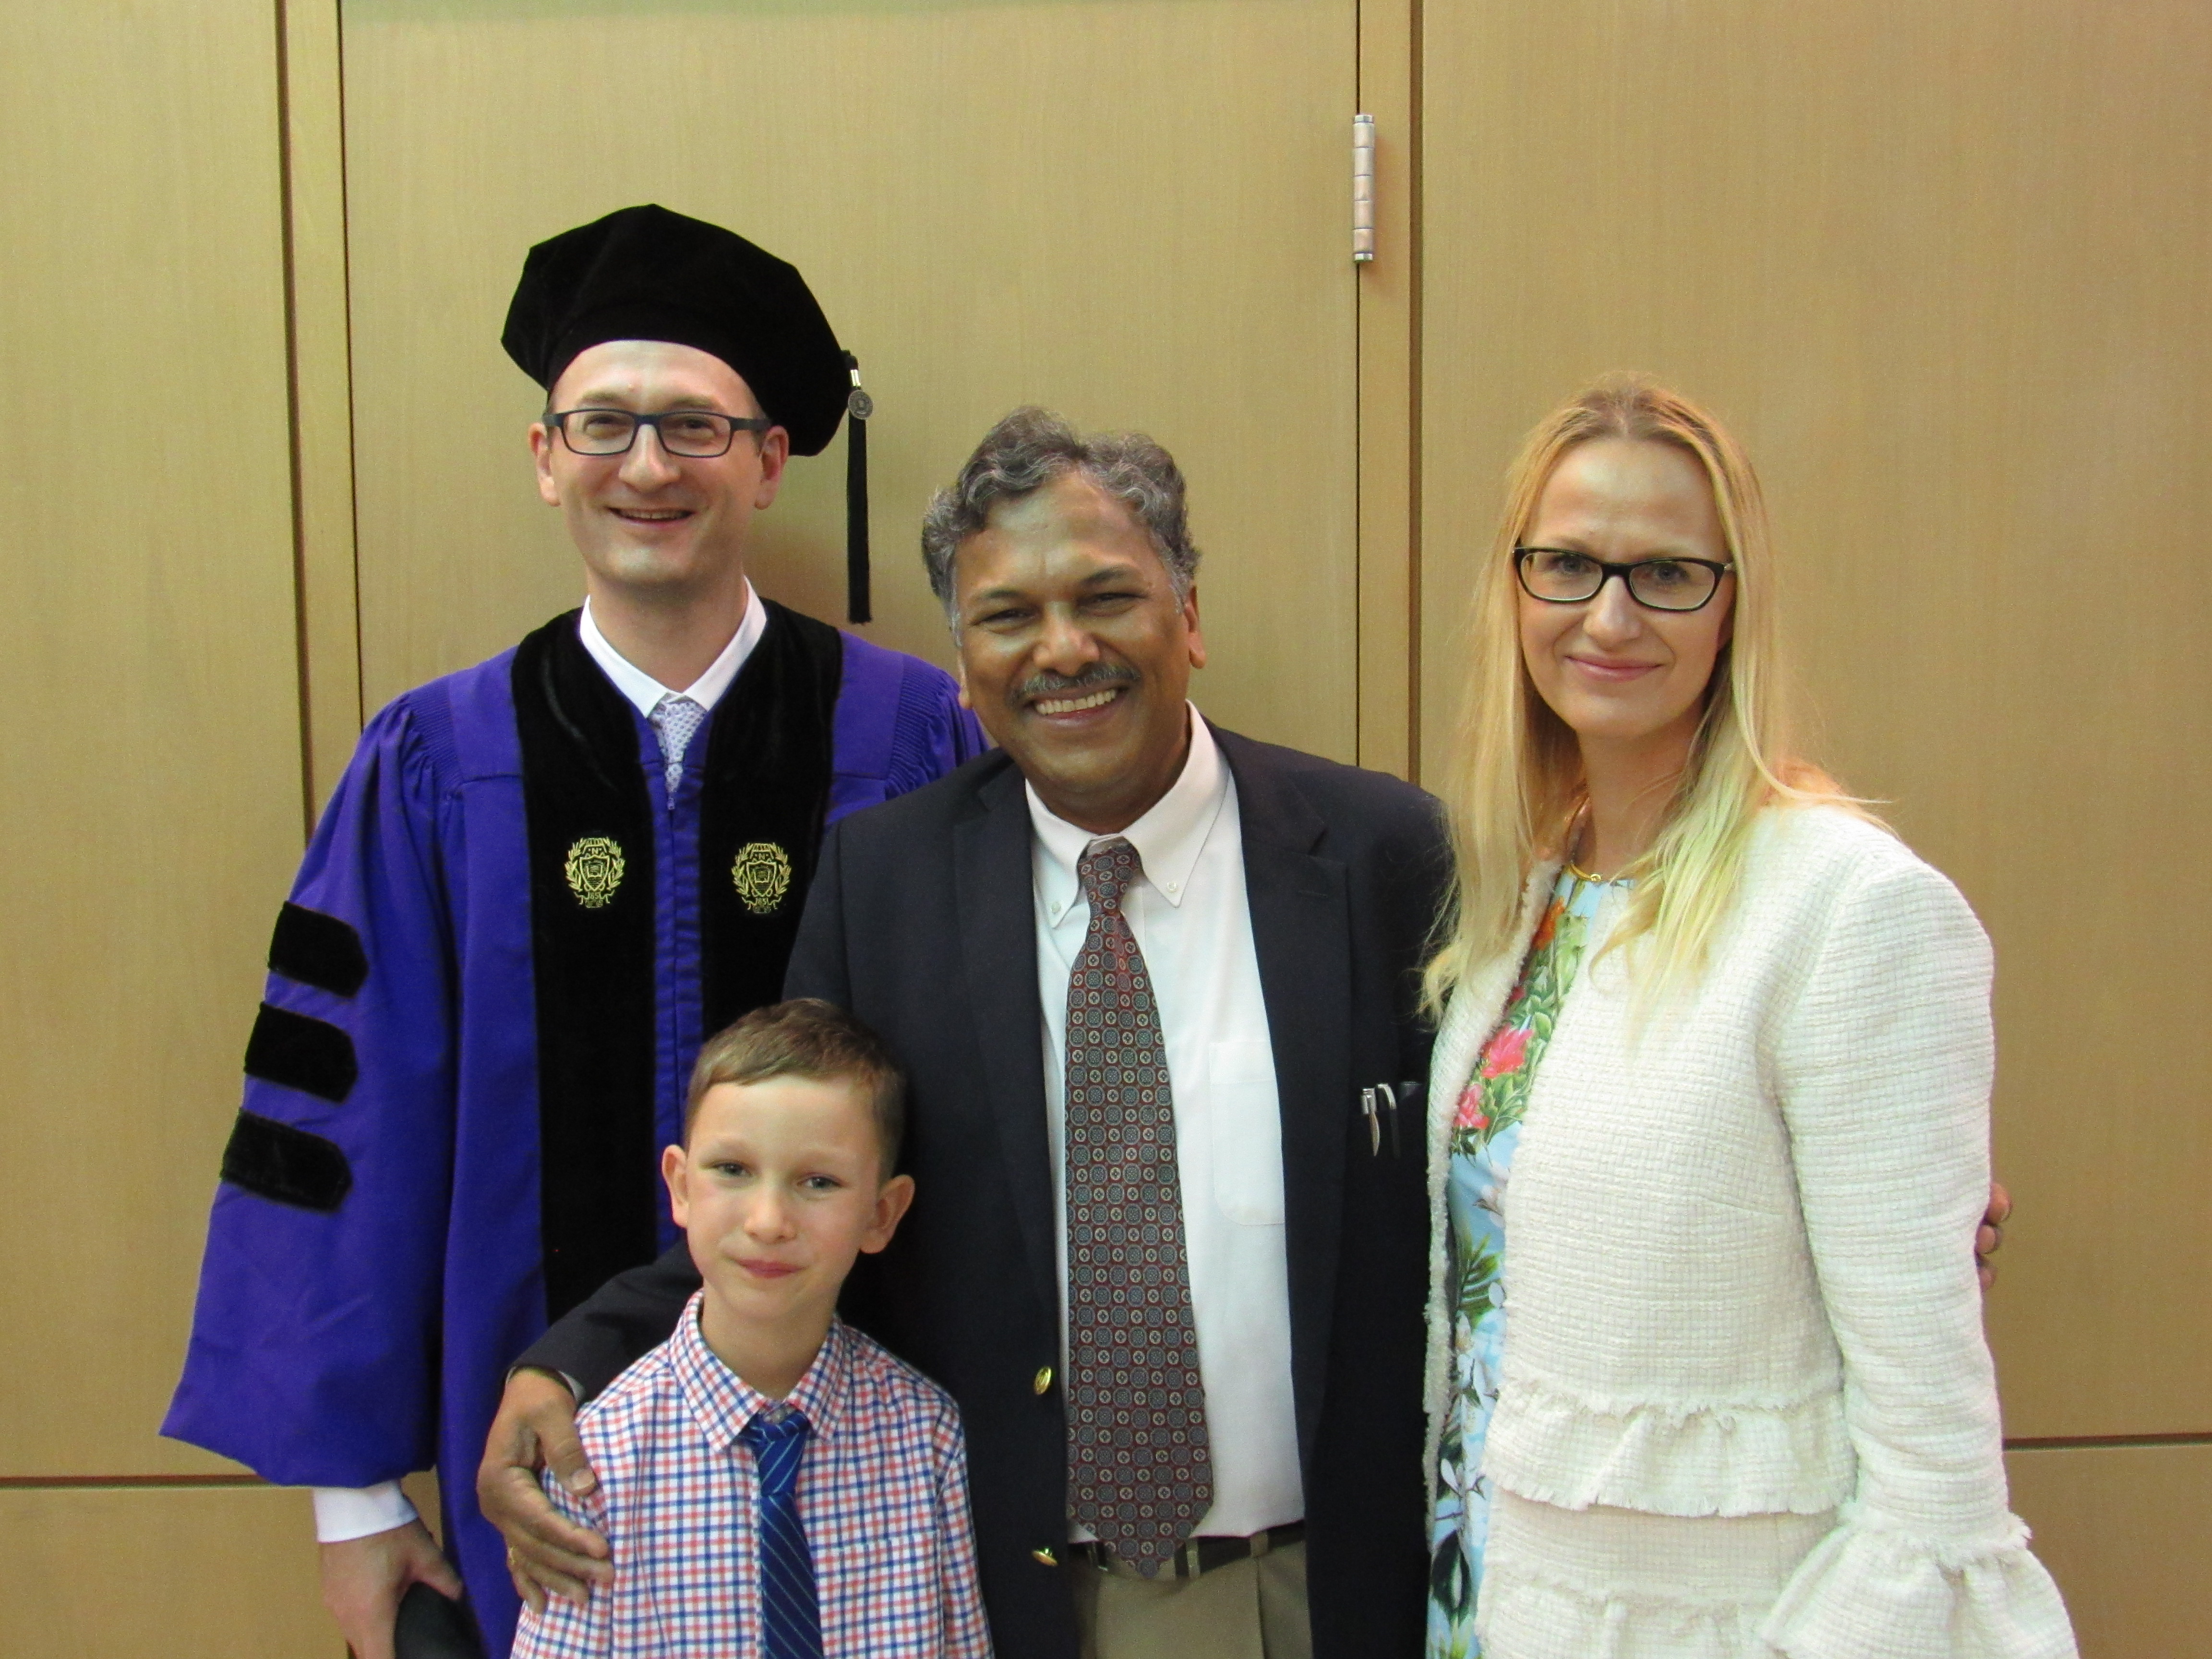 Professor Dravid poses with the Myers family at a commencement celebration in Cook Hall